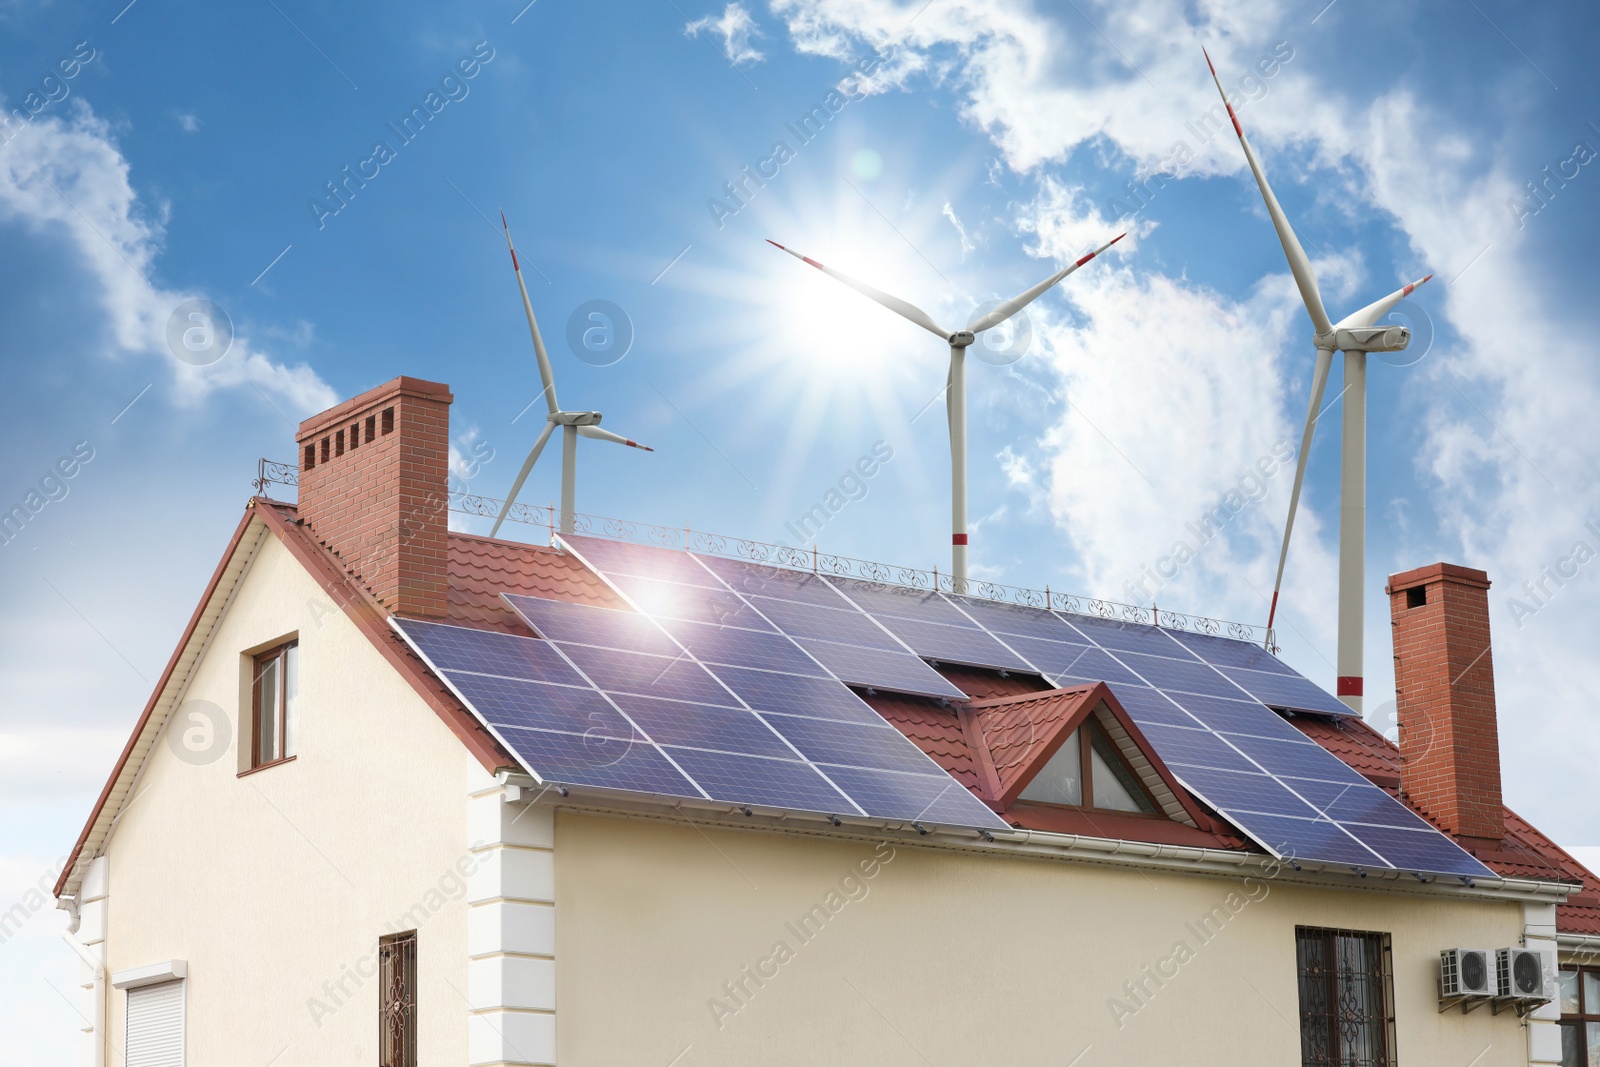 Image of Wind turbines near house with installed solar panels on roof. Alternative energy source